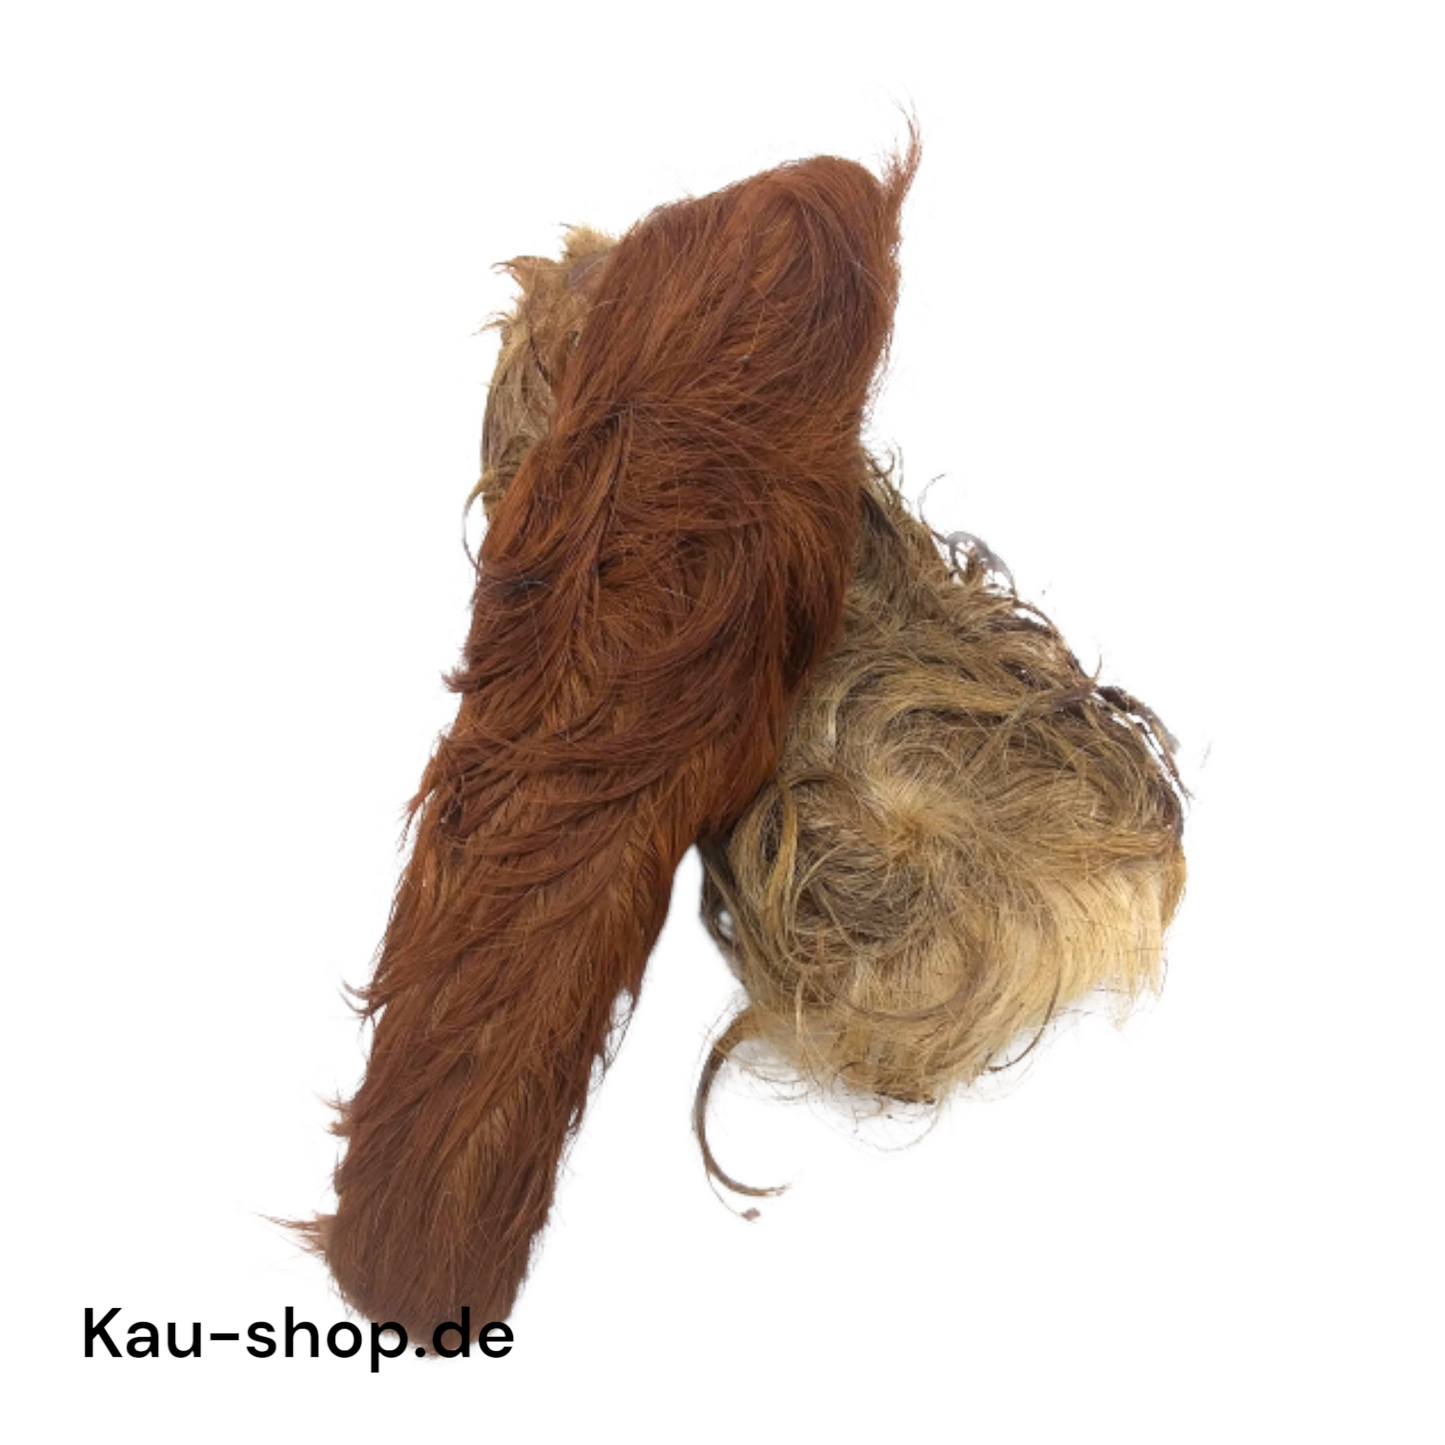 Cattle scalp with fur, approx. 15cm